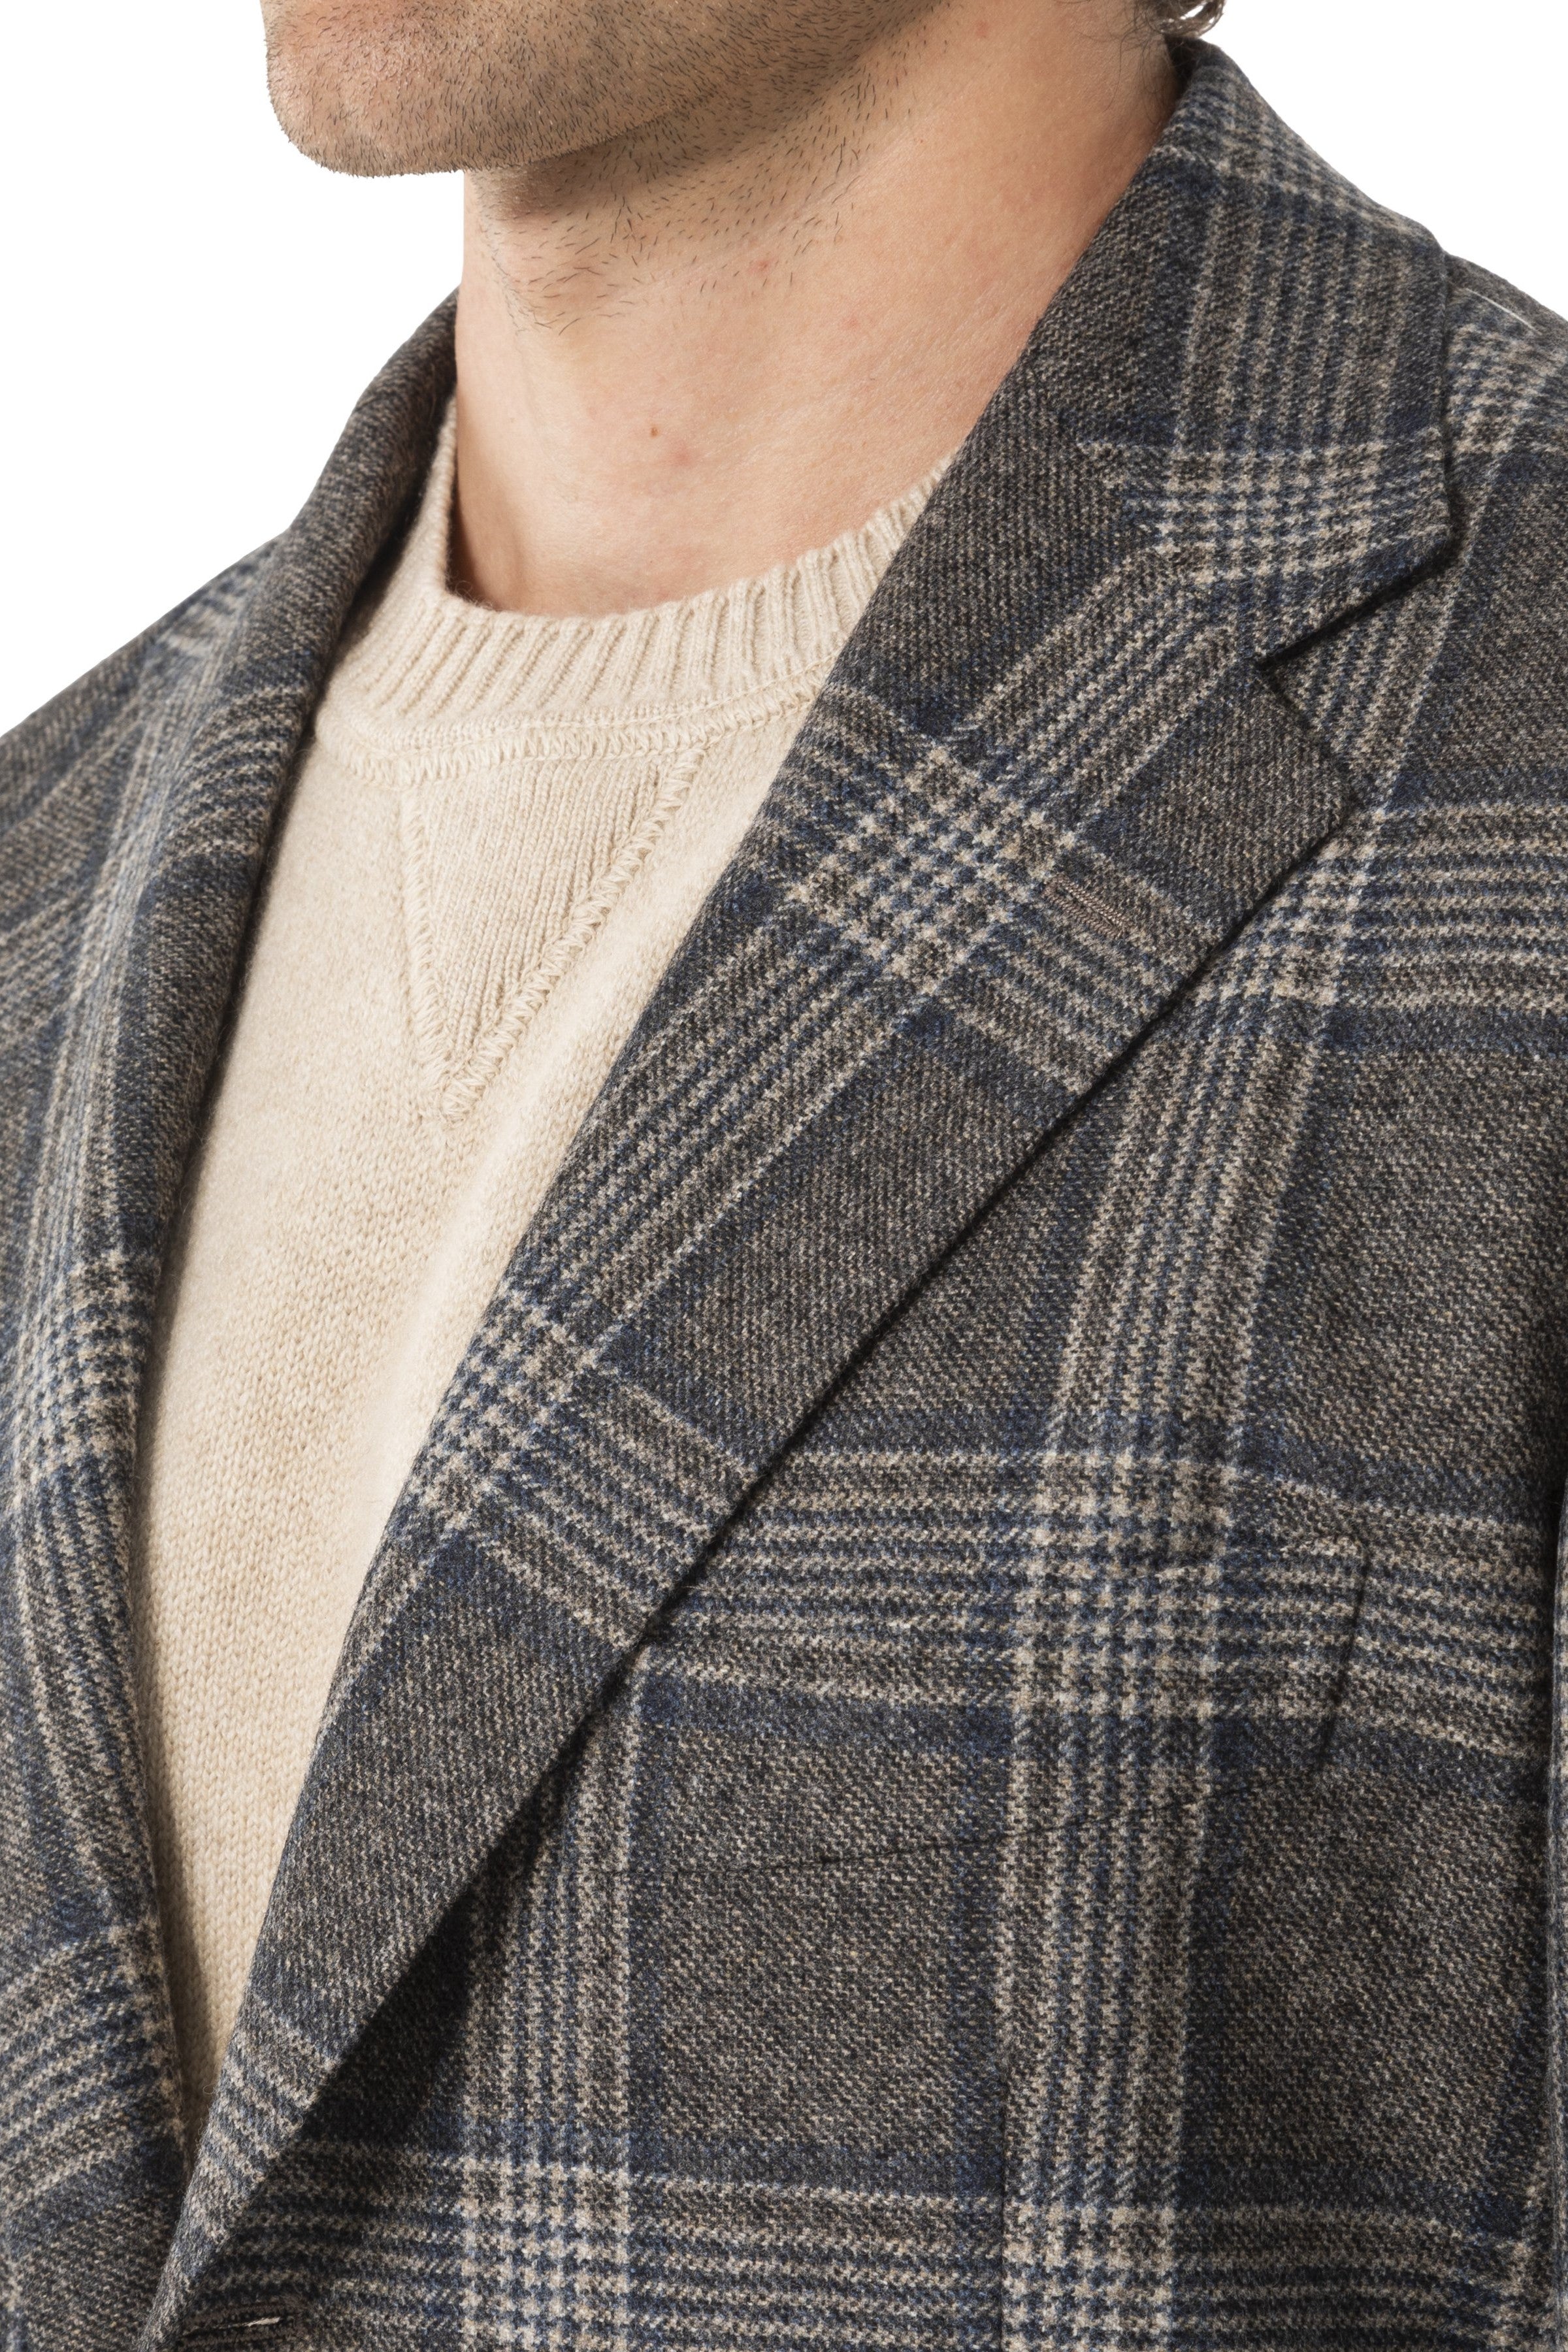 The Armoury by Ring Jacket Model 3 Grey-Blue Prince of Wales Check Wool Sport Coat